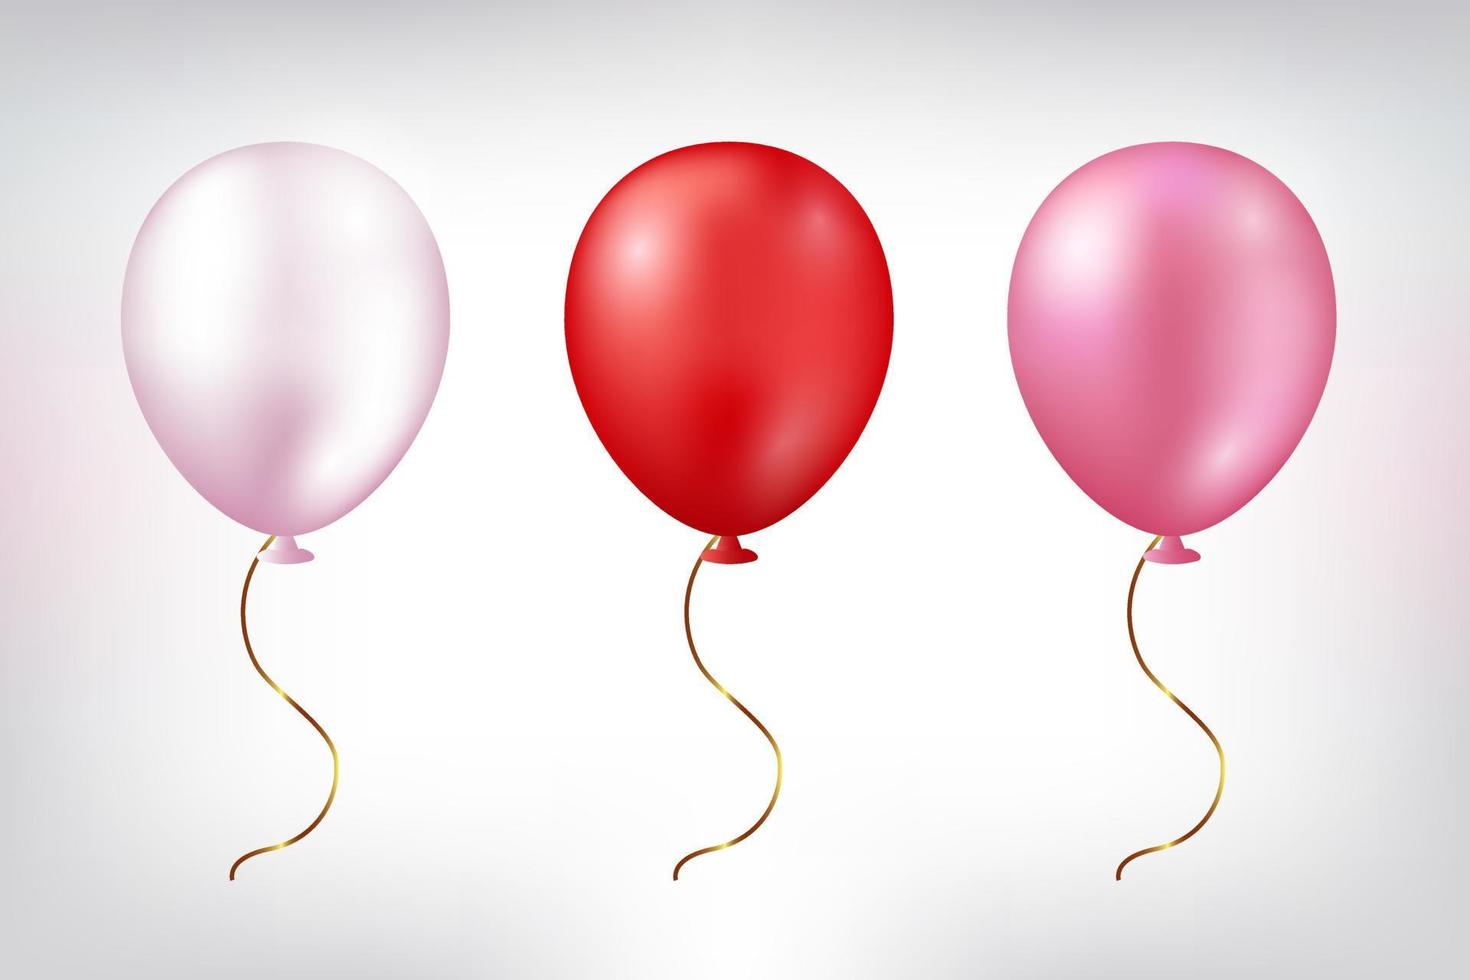 Set of red and pink balloons isolated on white. Vector illustration